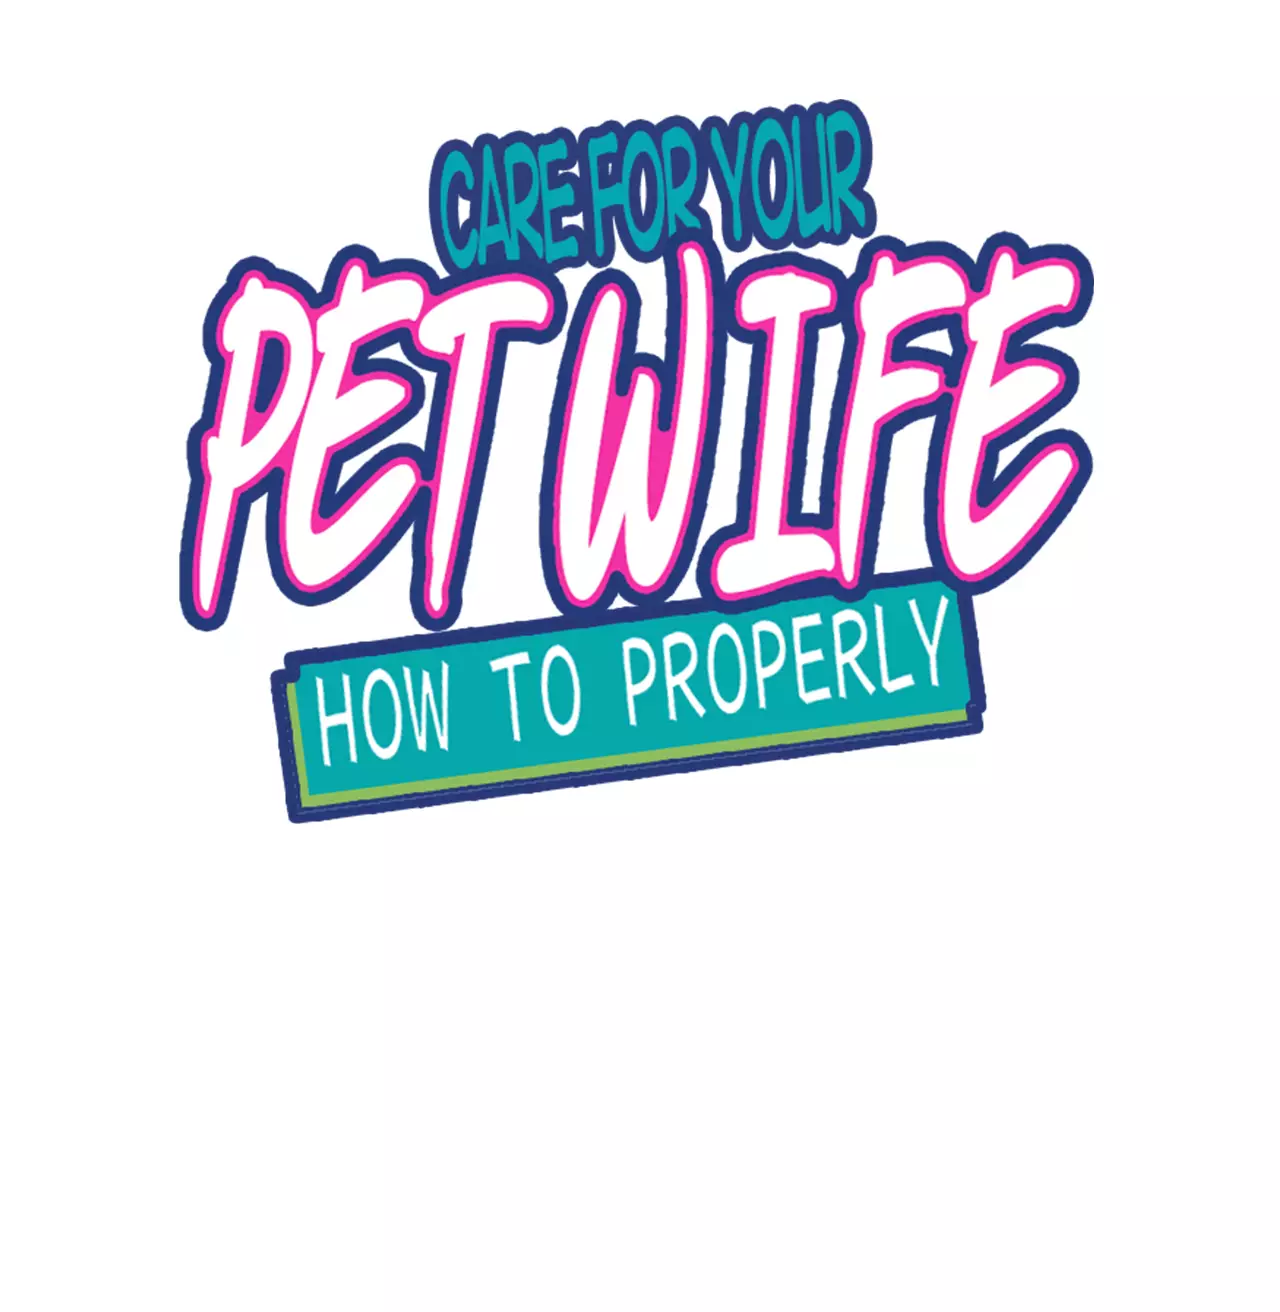 How To Properly Care For Your Pet Wife - 31.1 page 1